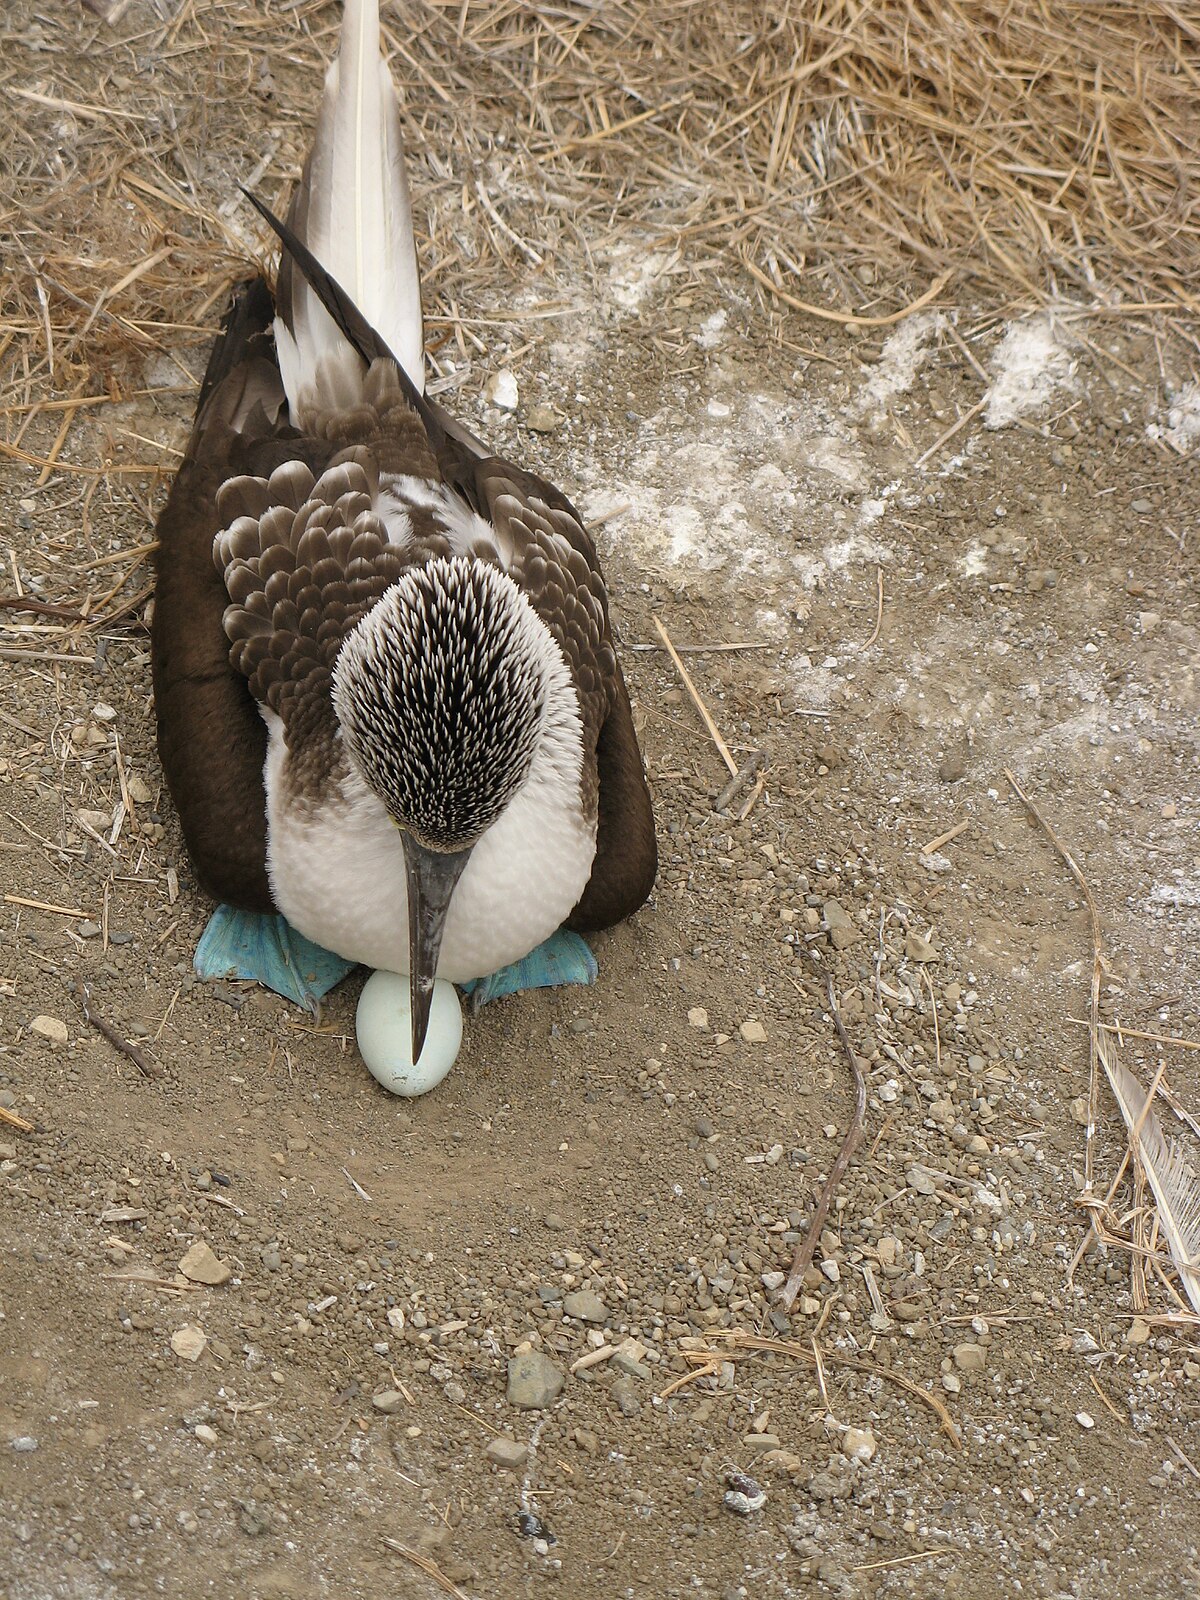 File:Ecuador Blue-footed Booby 6262.jpg - Wikimedia Commons